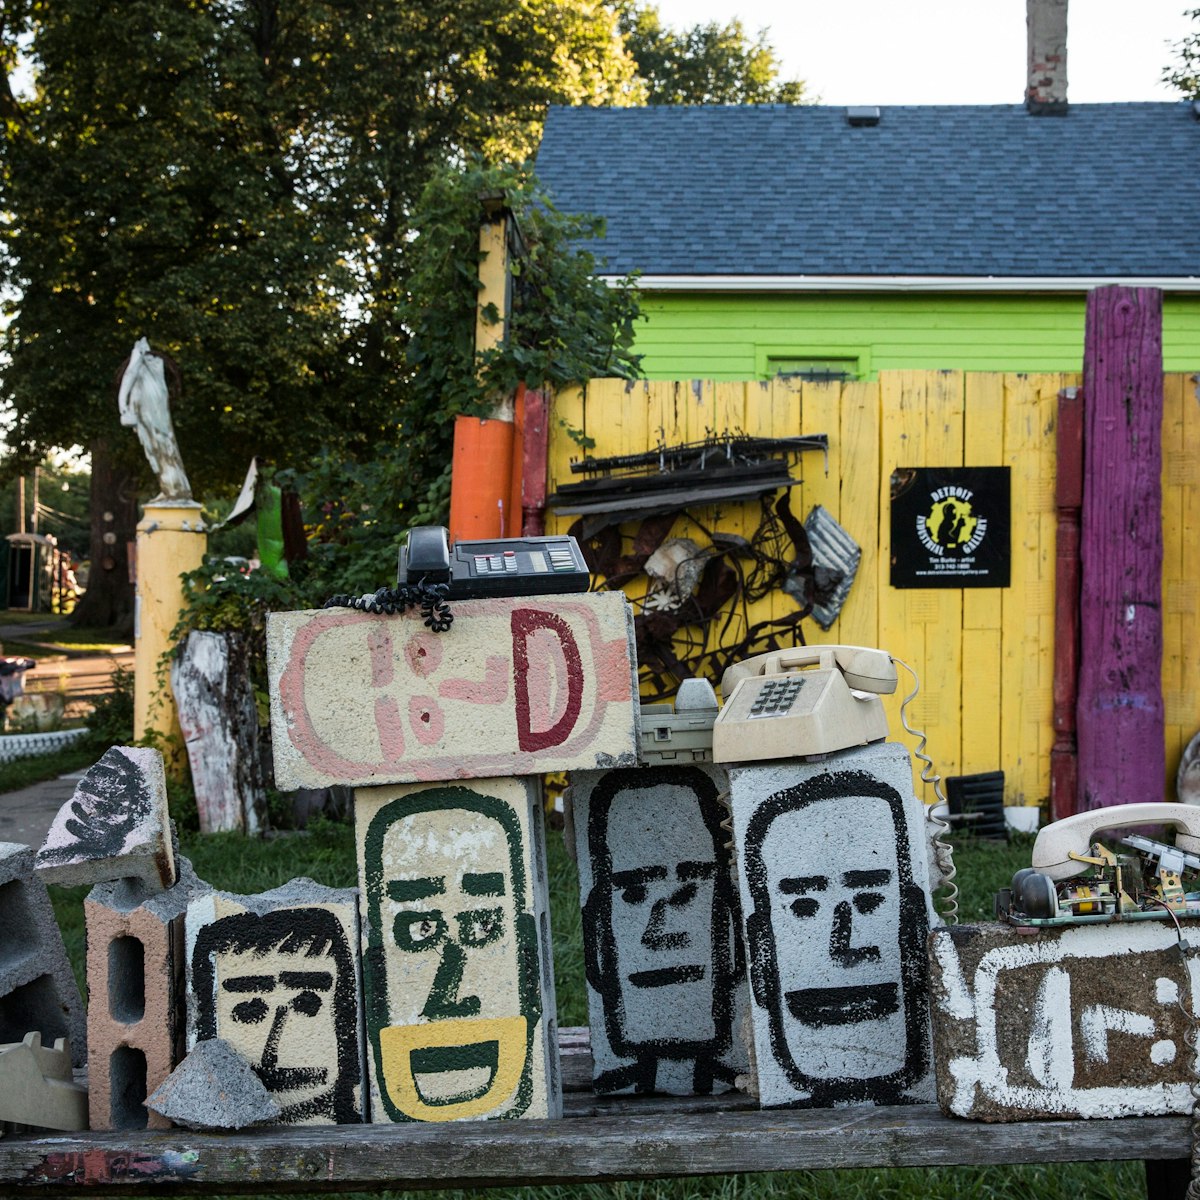 DETROIT, MI - SEPTEMBER 03:  A sculpture created from recycled material sits amongst the "Heidelberg project," which is an "open air art environment" centered around one block in Detroit, on September 3, 2013 in Detroit, Michigan. The Heidelberg project is the brain child of Tyree Guyton. He and other artists use the urban environment (including homes and sidewalks) as a canvas for art, which they make using paint and recycled materials.  (Photo by Andrew Burton/Getty Images)